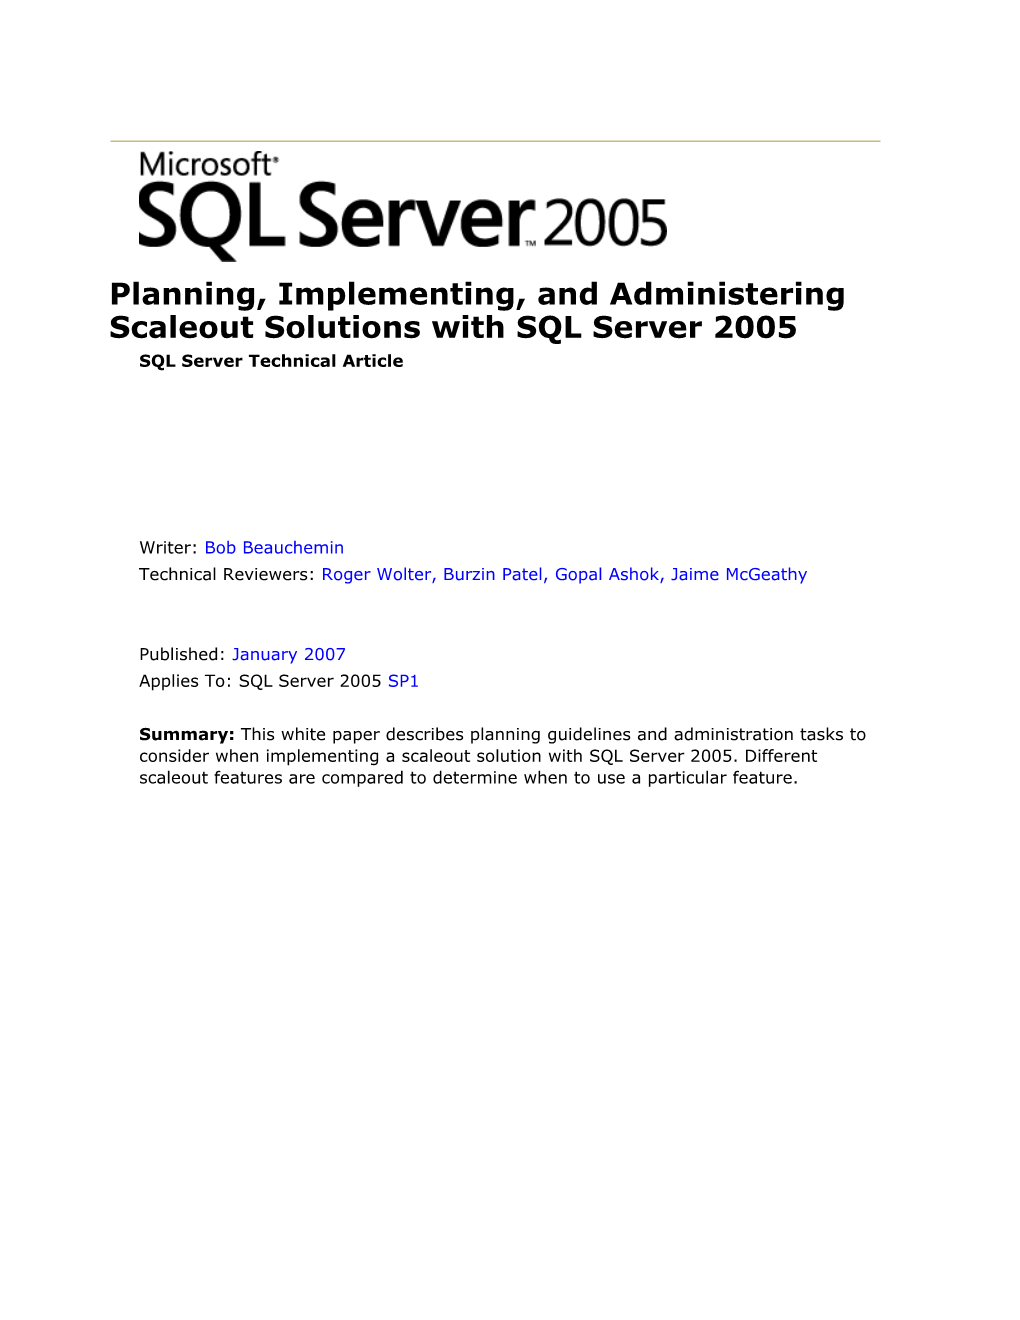 Planning, Implementing, and Administering Scaleout Solutions with SQL Server 2005